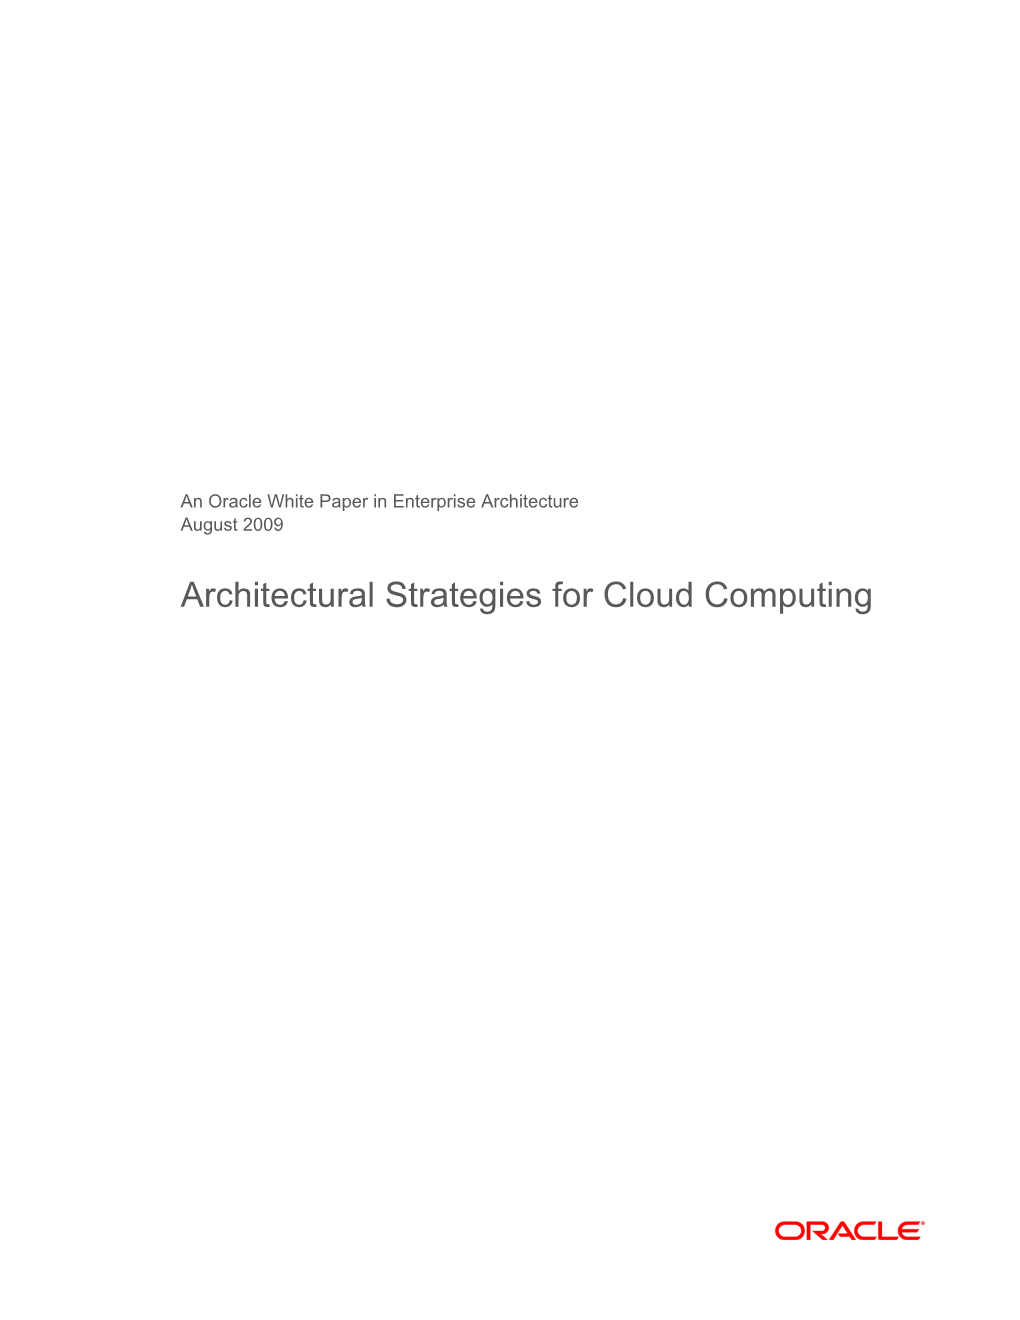 Architectural Strategies for Cloud Computing